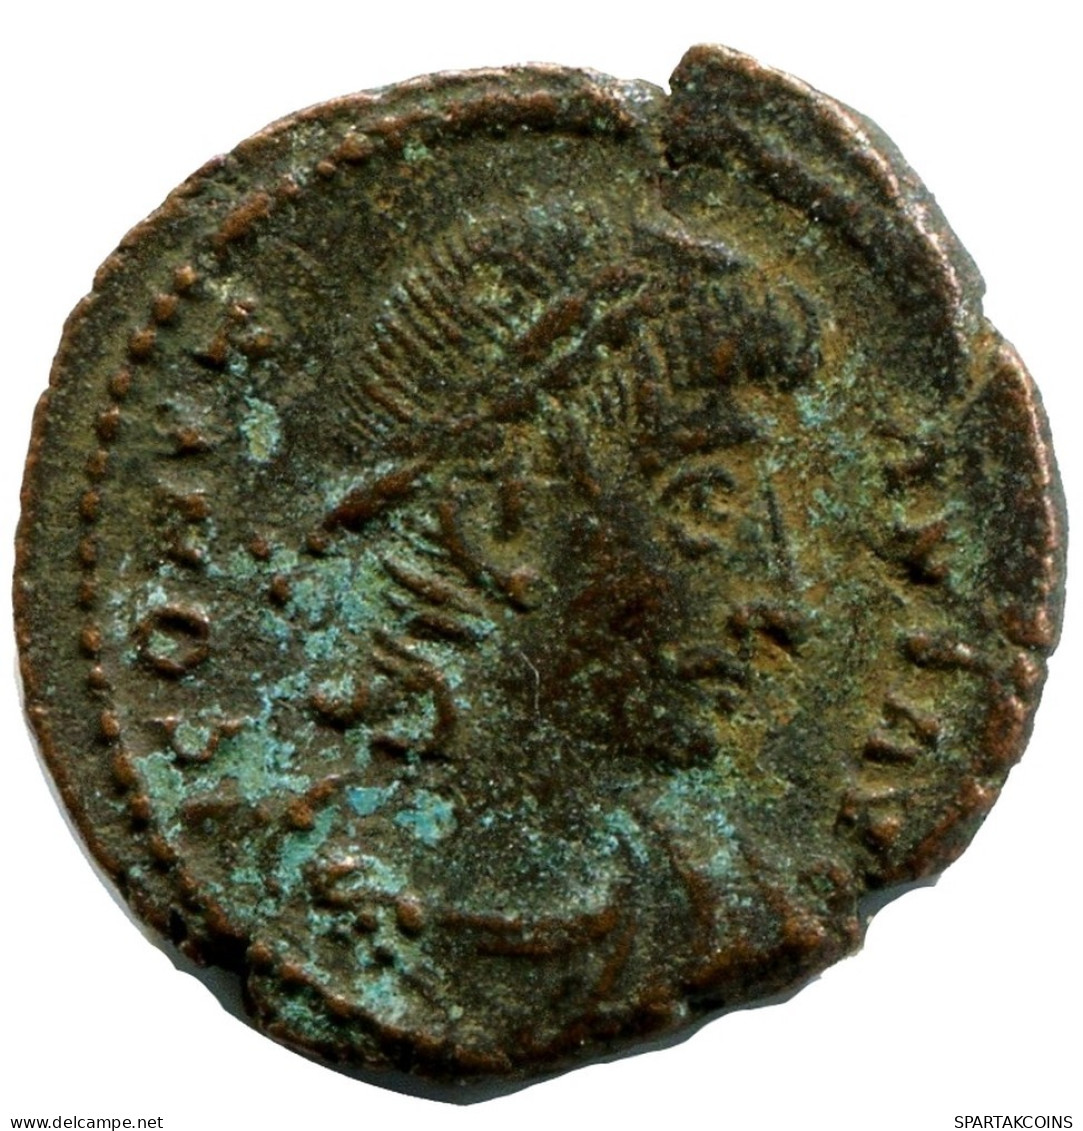 CONSTANS MINTED IN ALEKSANDRIA FROM THE ROYAL ONTARIO MUSEUM #ANC11467.14.E.A - The Christian Empire (307 AD Tot 363 AD)